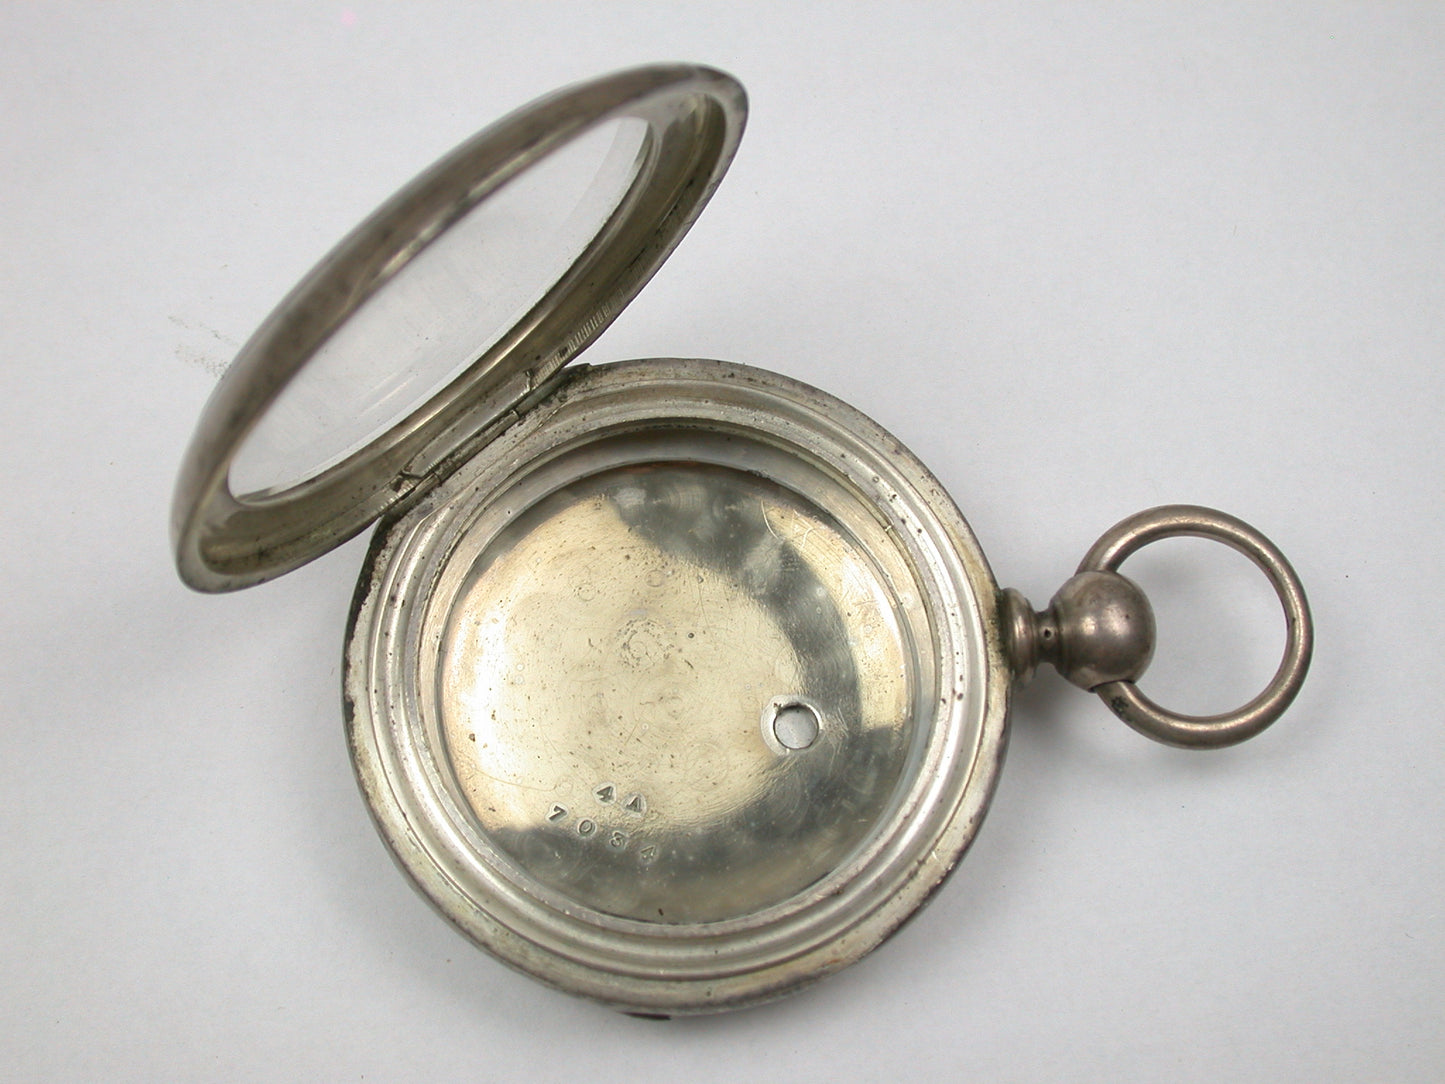 American 18 Size 4 Ounce Dueber Pocket Watch Coin Silver Case